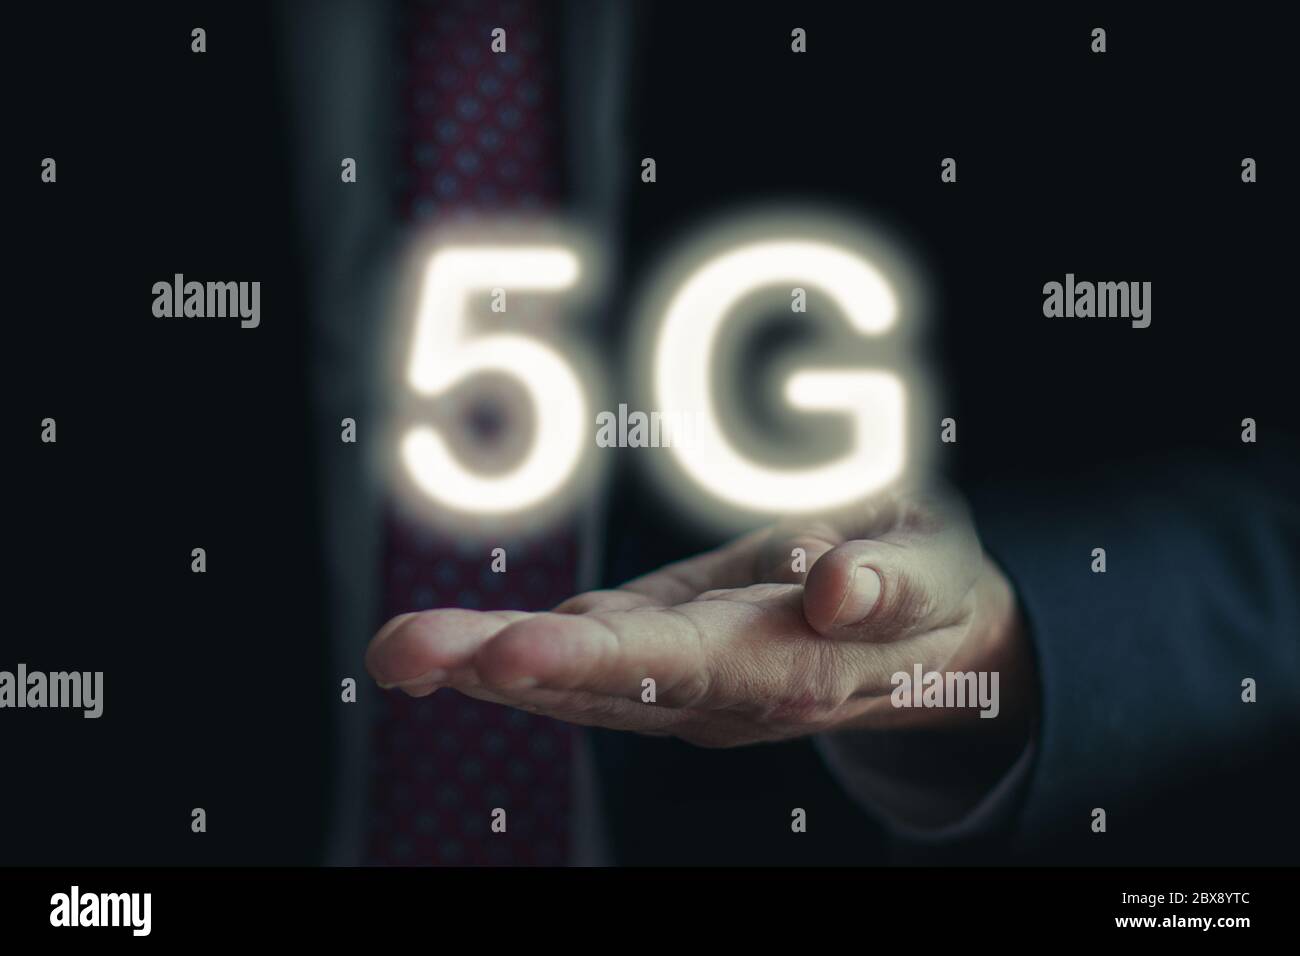 Businessman hold 5G network interface logo on his hand Stock Photo